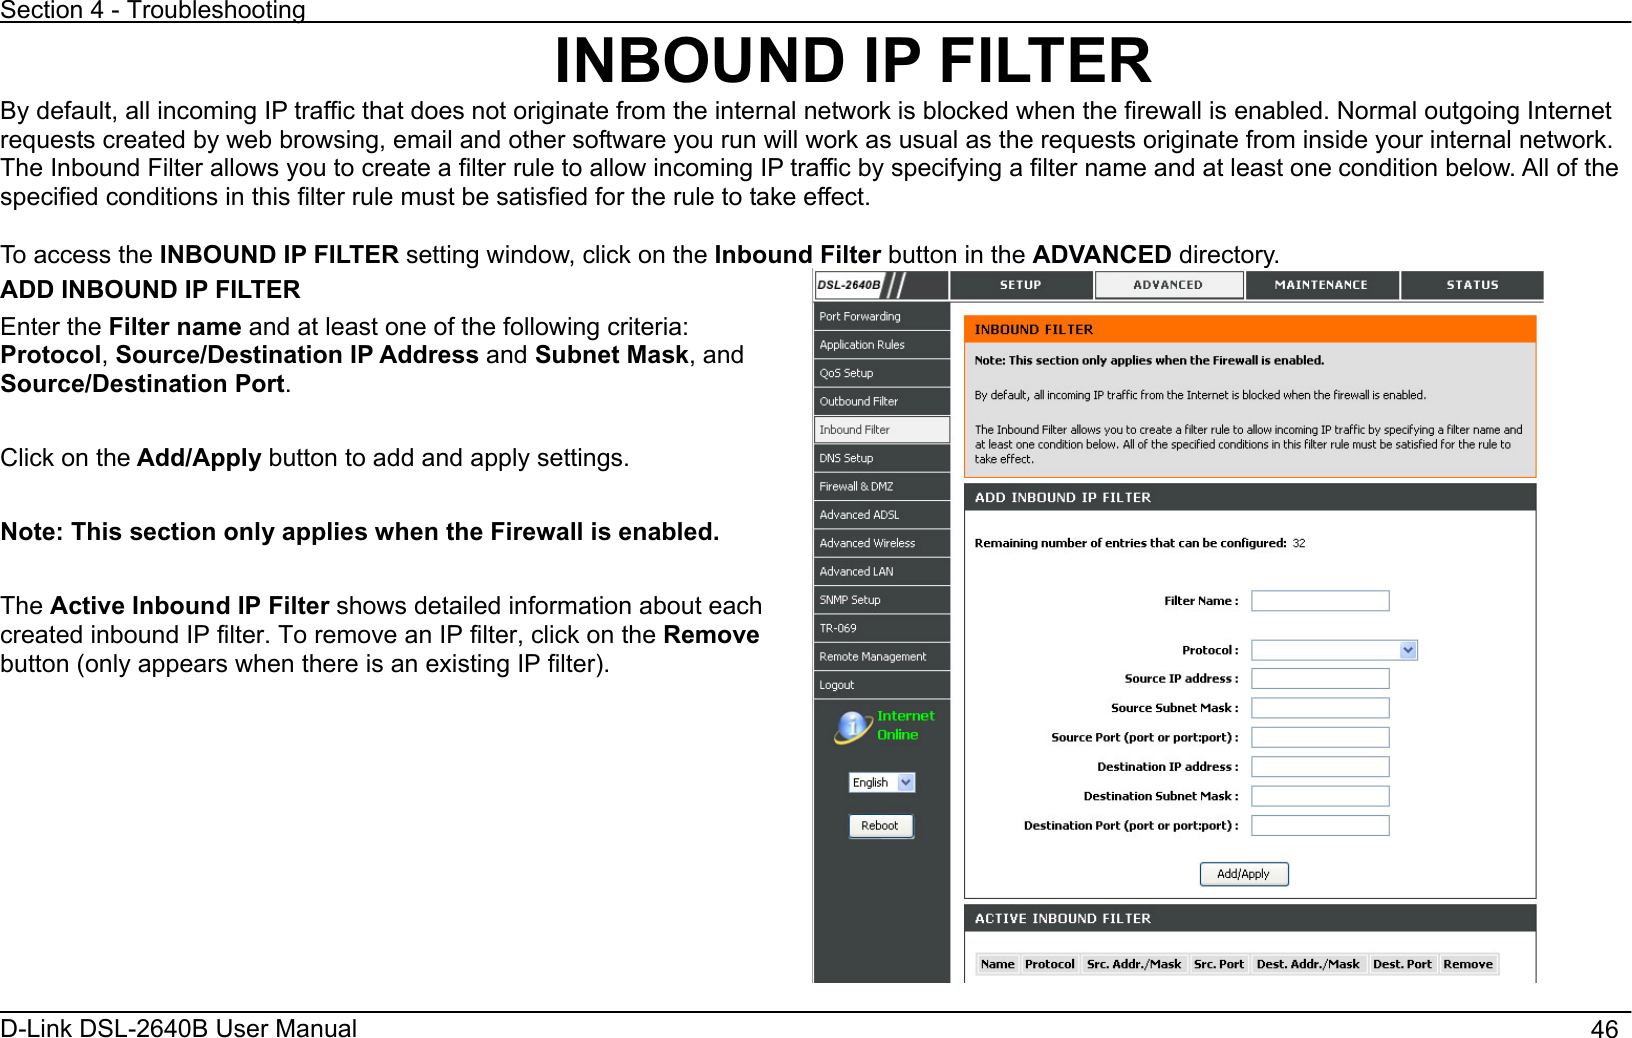 Section 4 - Troubleshooting D-Link DSL-2640B User Manual                                       46INBOUND IP FILTER By default, all incoming IP traffic that does not originate from the internal network is blocked when the firewall is enabled. Normal outgoing Internet requests created by web browsing, email and other software you run will work as usual as the requests originate from inside your internal network. The Inbound Filter allows you to create a filter rule to allow incoming IP traffic by specifying a filter name and at least one condition below. All of the specified conditions in this filter rule must be satisfied for the rule to take effect. To access the INBOUND IP FILTER setting window, click on the Inbound Filter button in the ADVANCED directory. ADD INBOUND IP FILTER Enter the Filter name and at least one of the following criteria: Protocol,Source/Destination IP Address and Subnet Mask, and Source/Destination Port.Click on the Add/Apply button to add and apply settings.   Note: This section only applies when the Firewall is enabled. The Active Inbound IP Filter shows detailed information about each created inbound IP filter. To remove an IP filter, click on the Removebutton (only appears when there is an existing IP filter). 